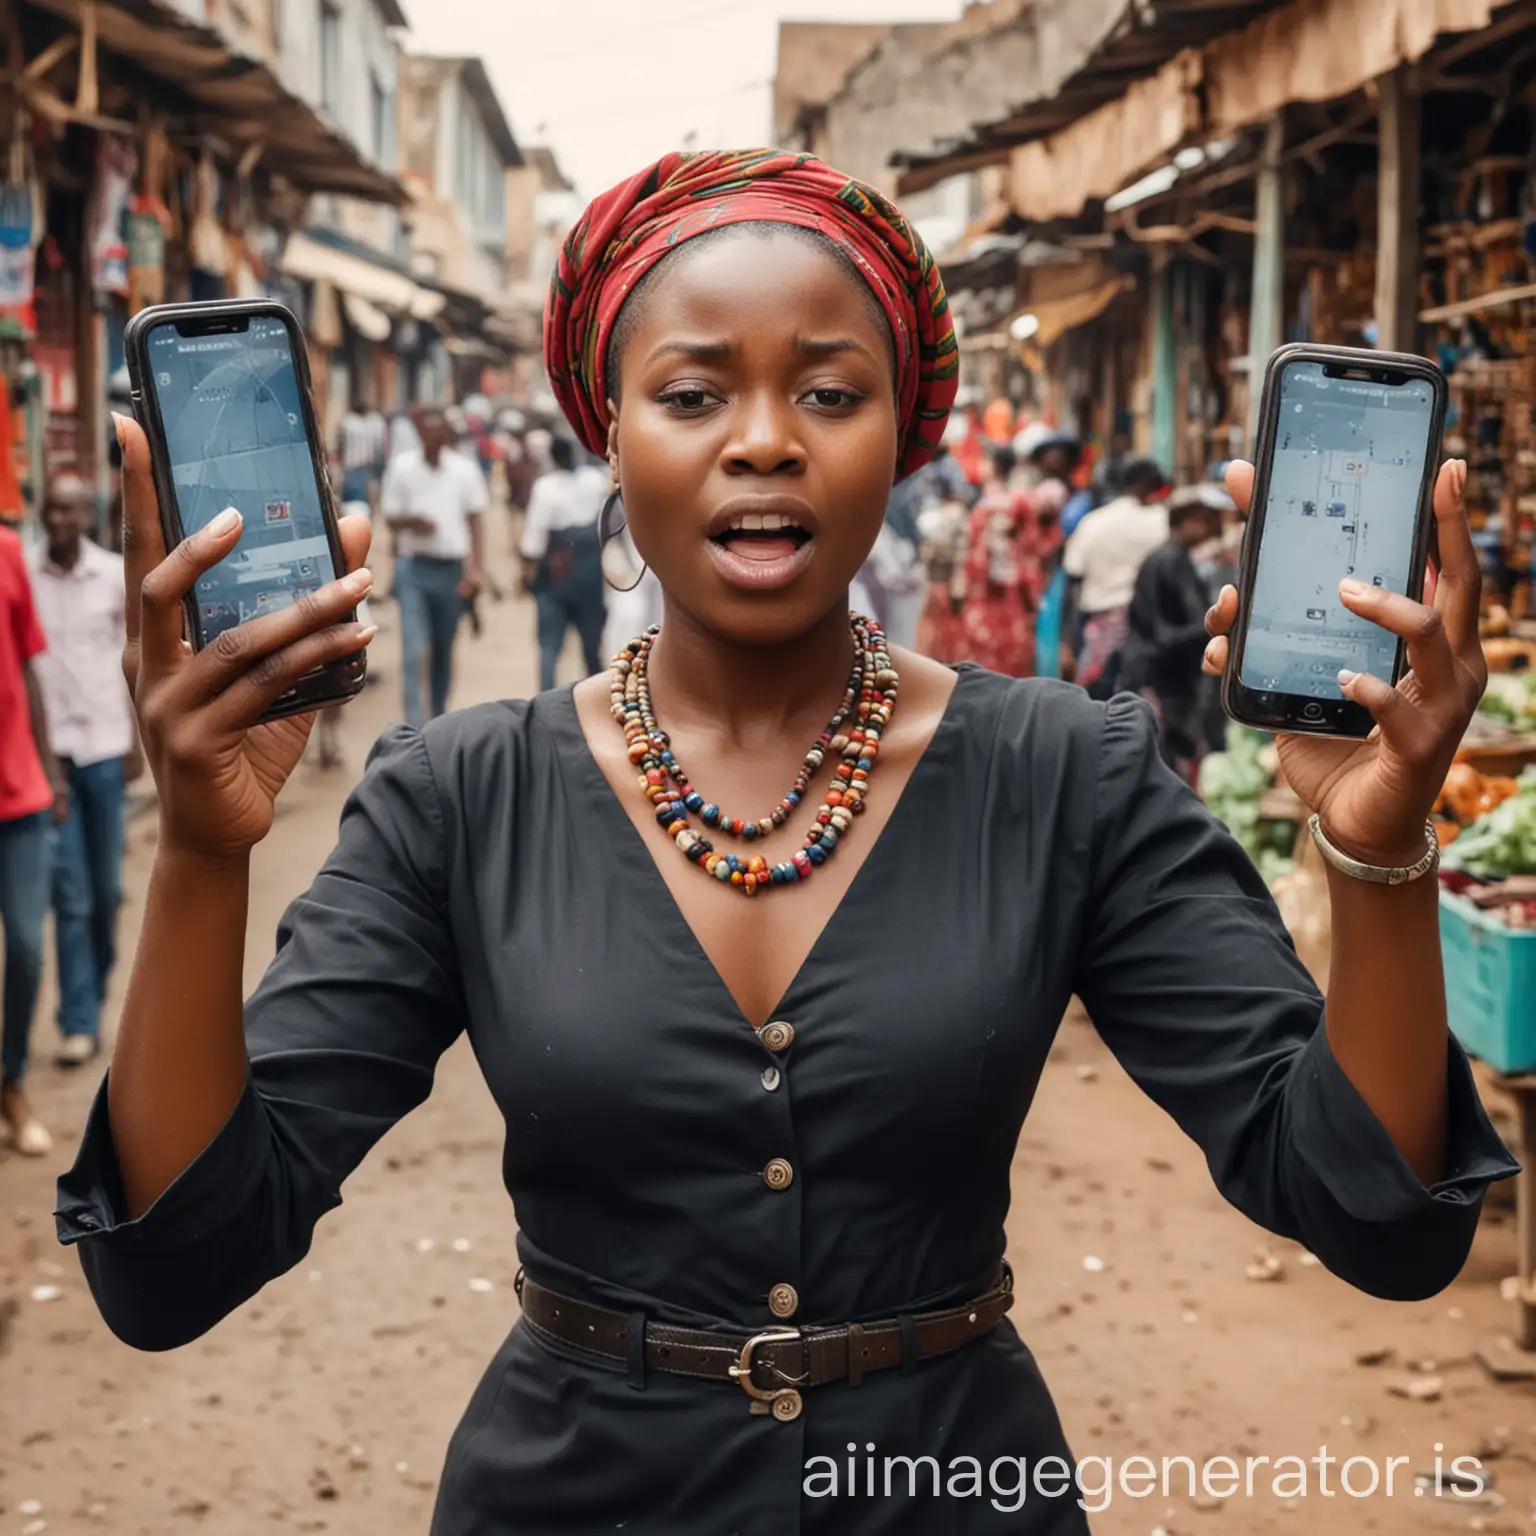 An African mad woman tapping her three phones simultaneously with both hands furiously in the market place